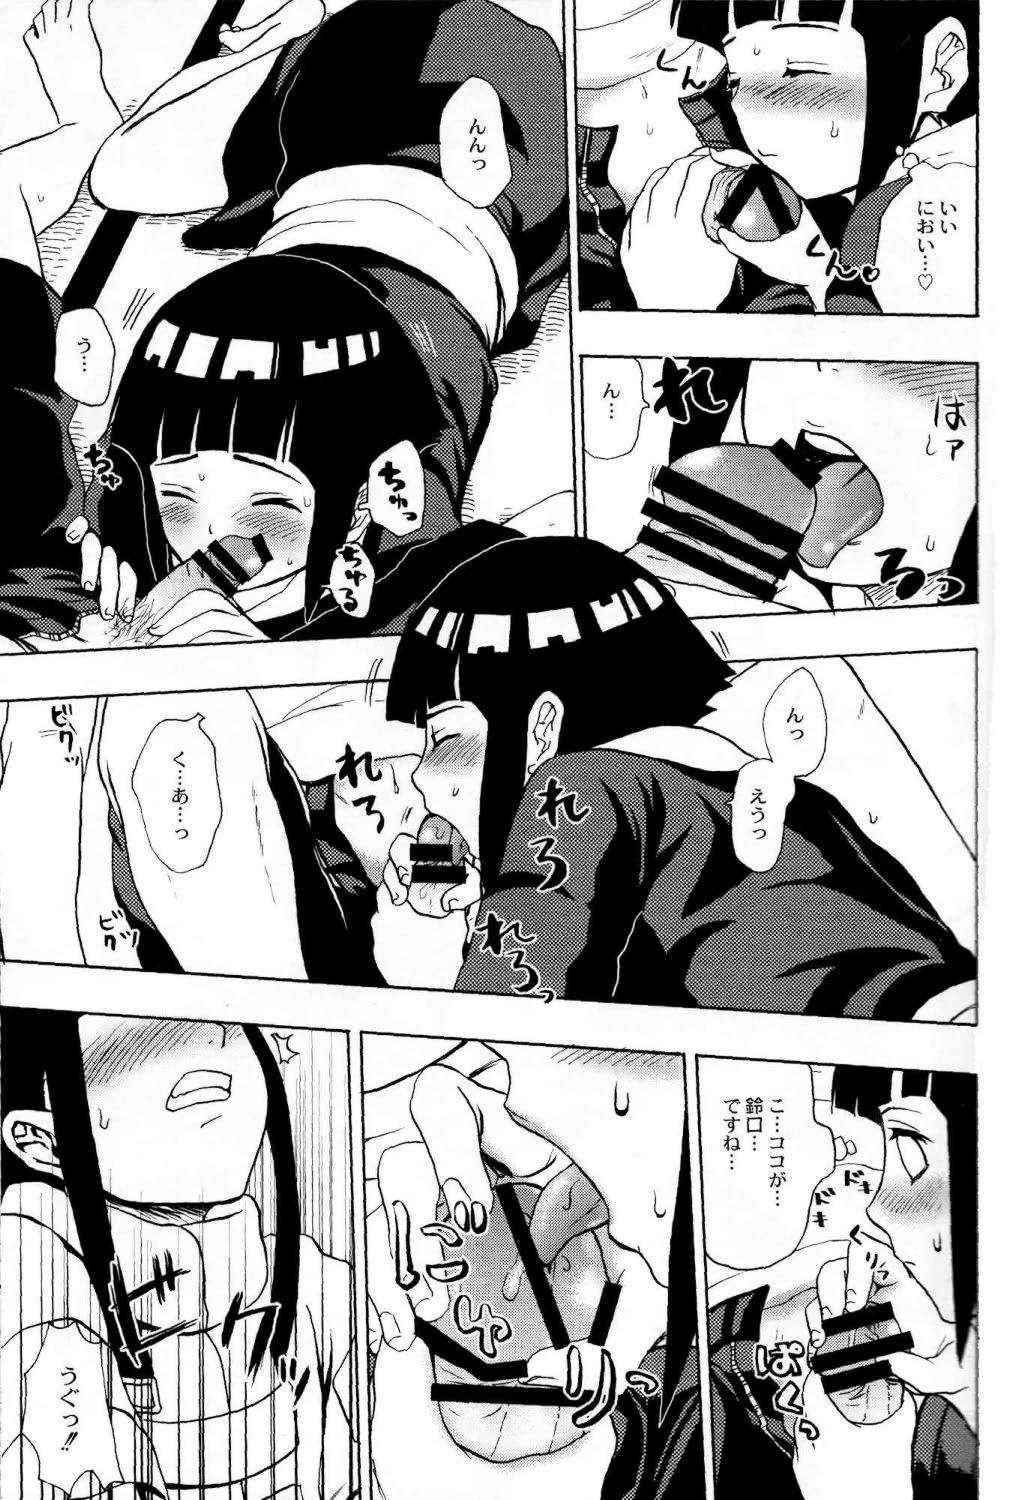 Transsexual Ie de Nii-san to - Naruto Sexo Anal - Page 10